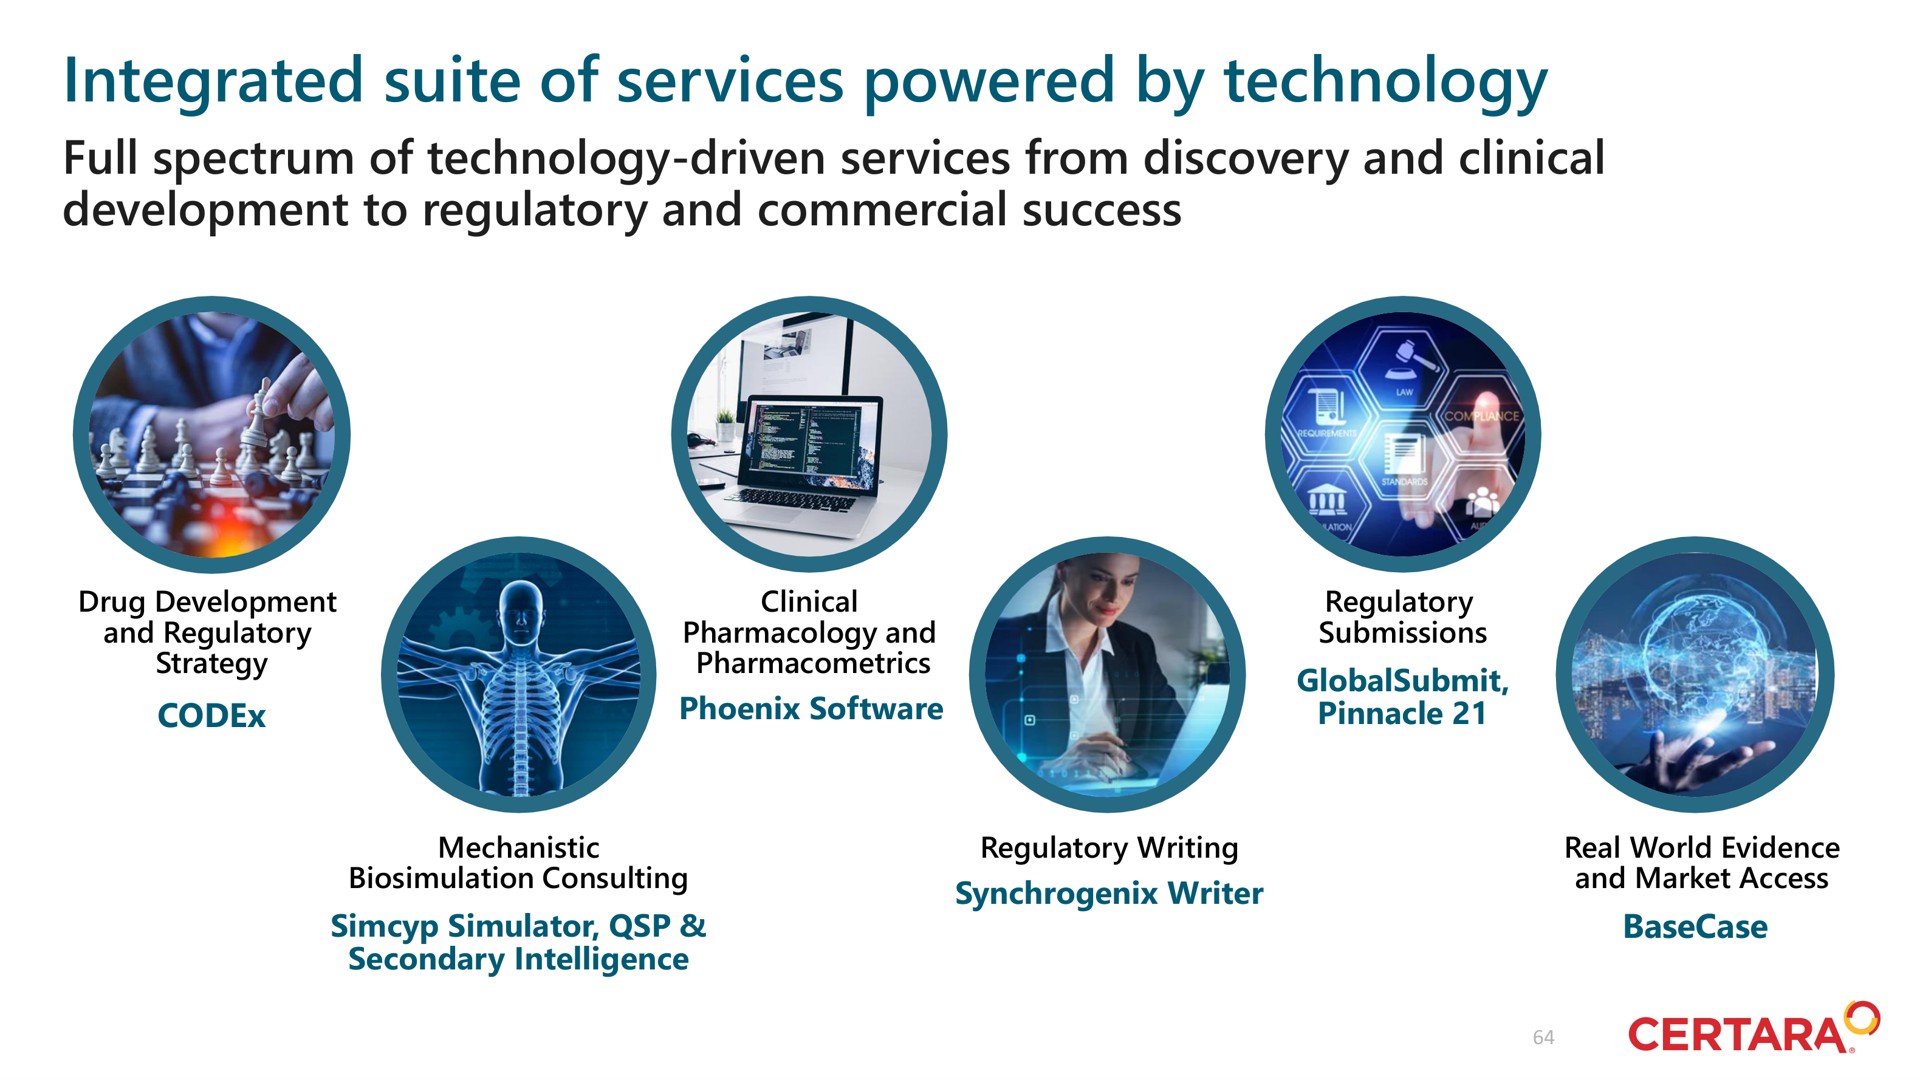 integrated suite of services powered by technology | Certara